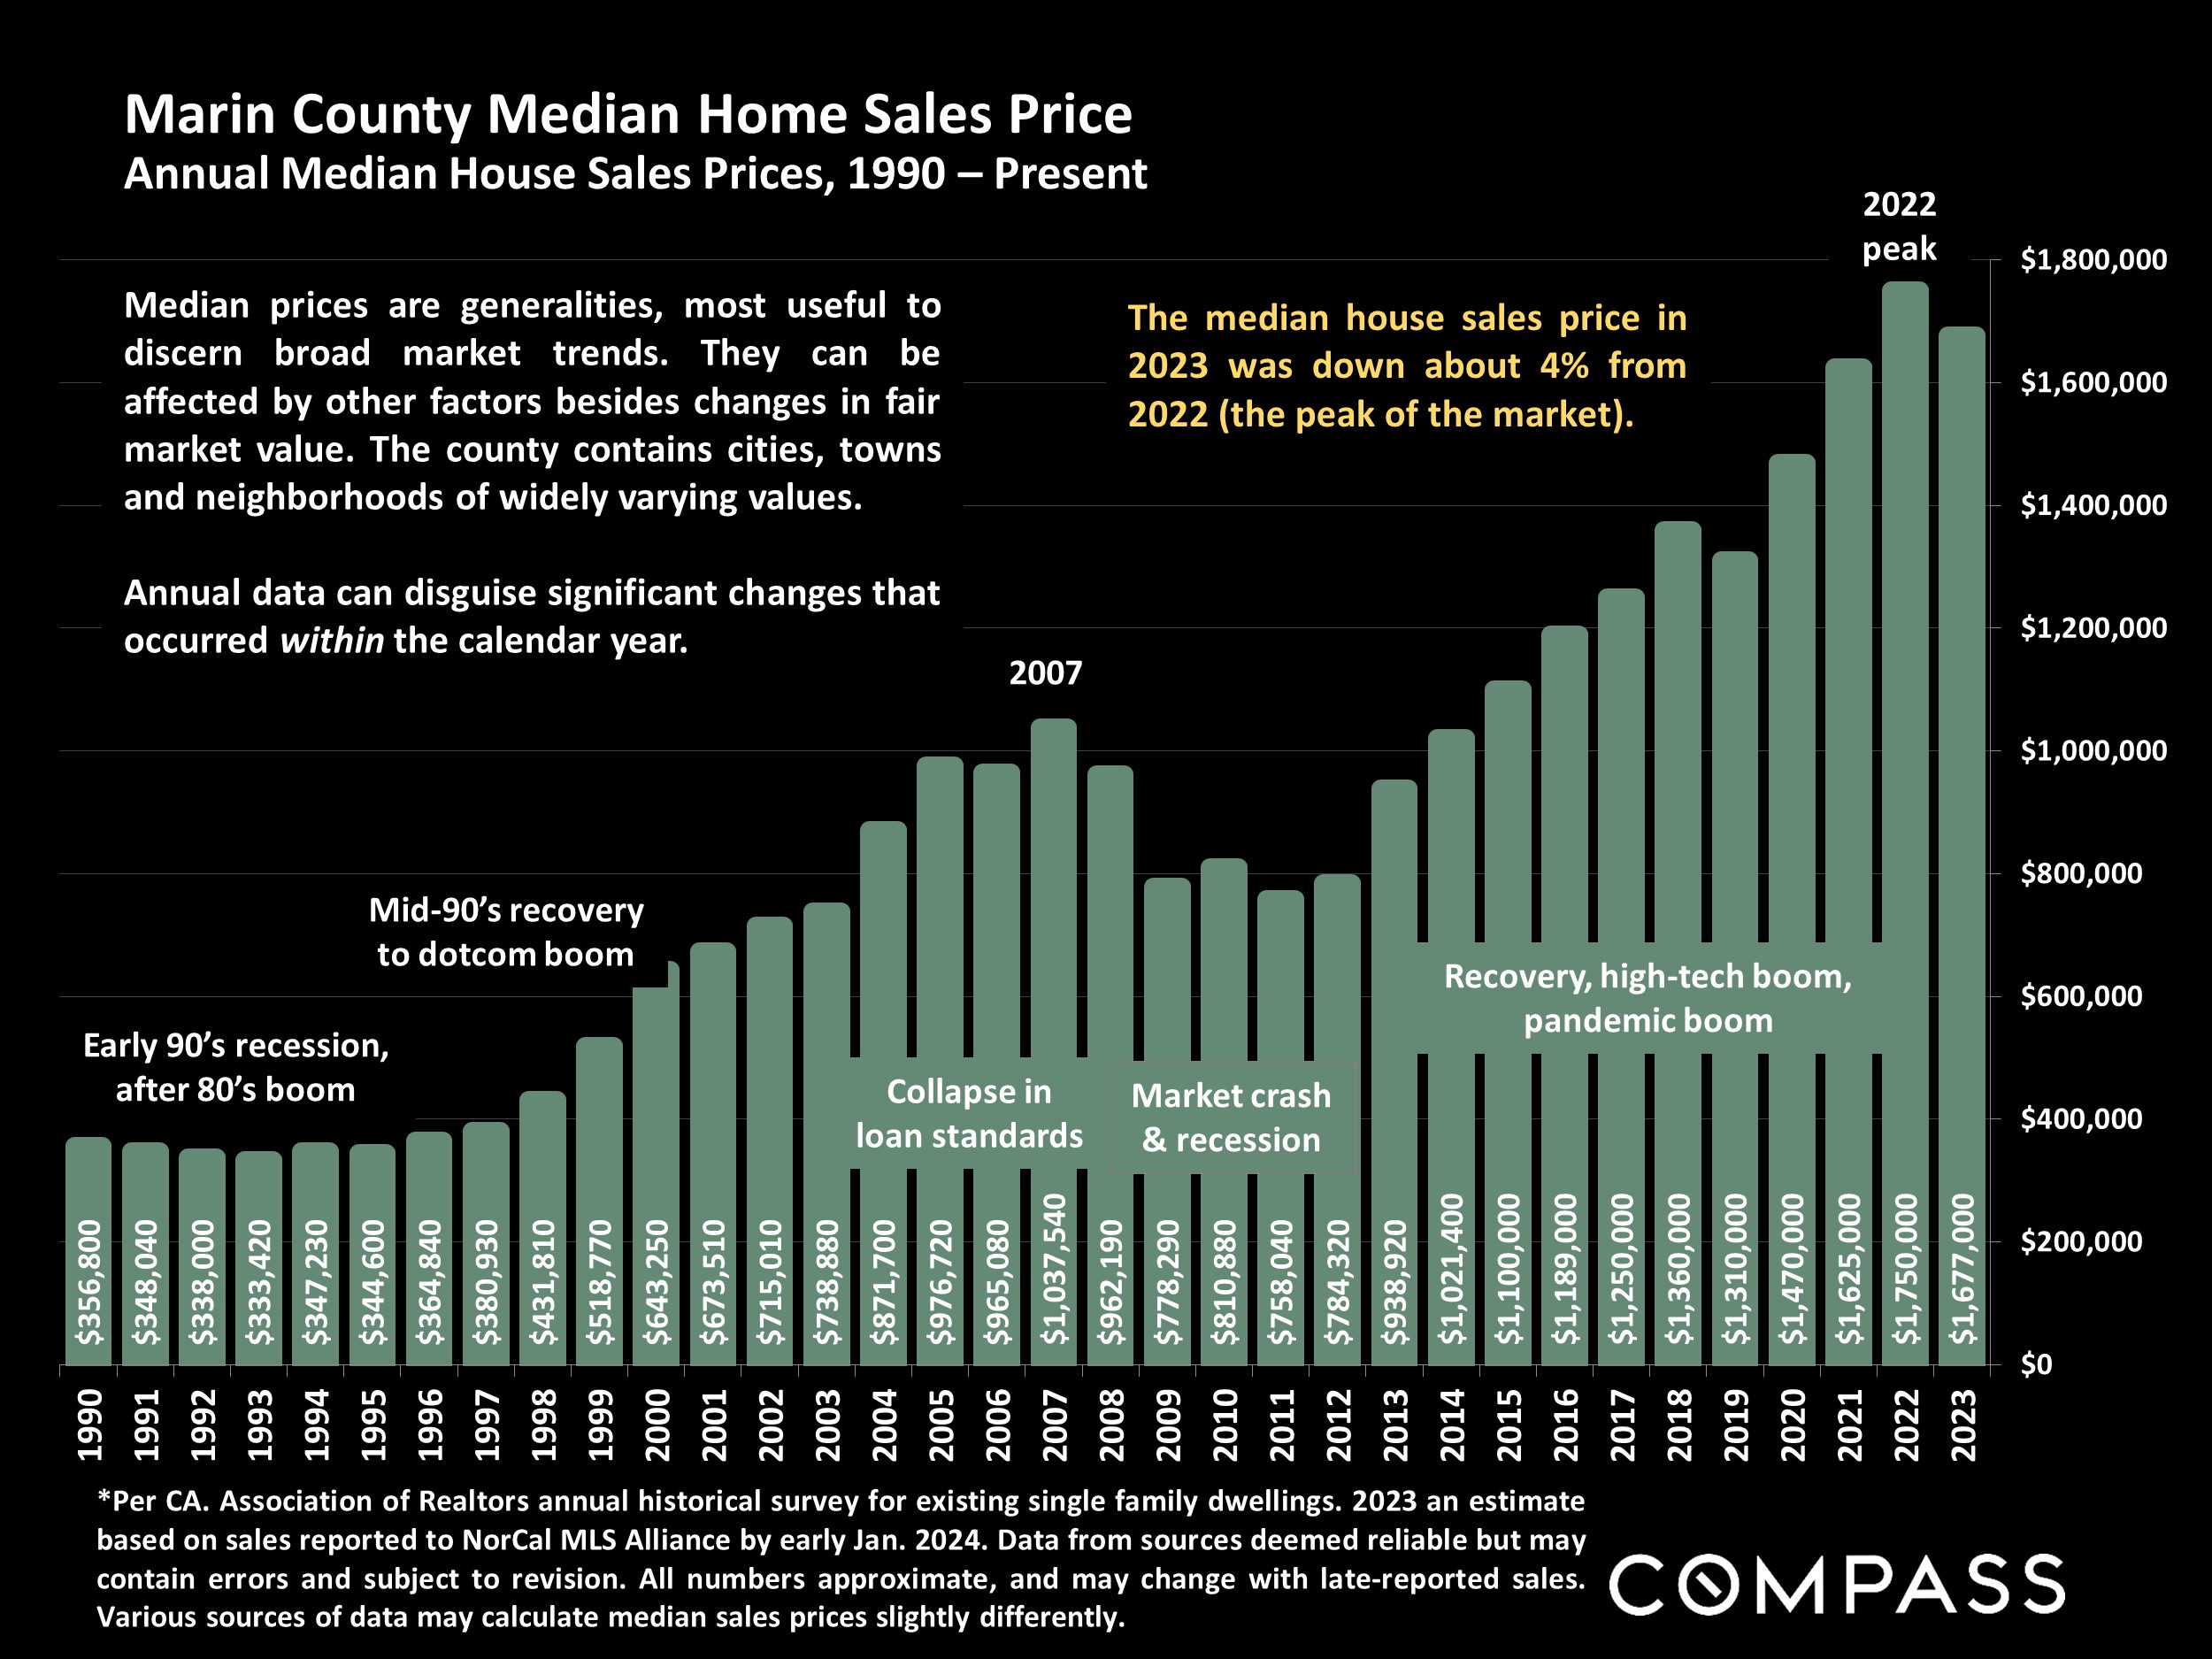 Marin County Median Home Sales Price Annual Median House Sales Prices, 1990 - Present